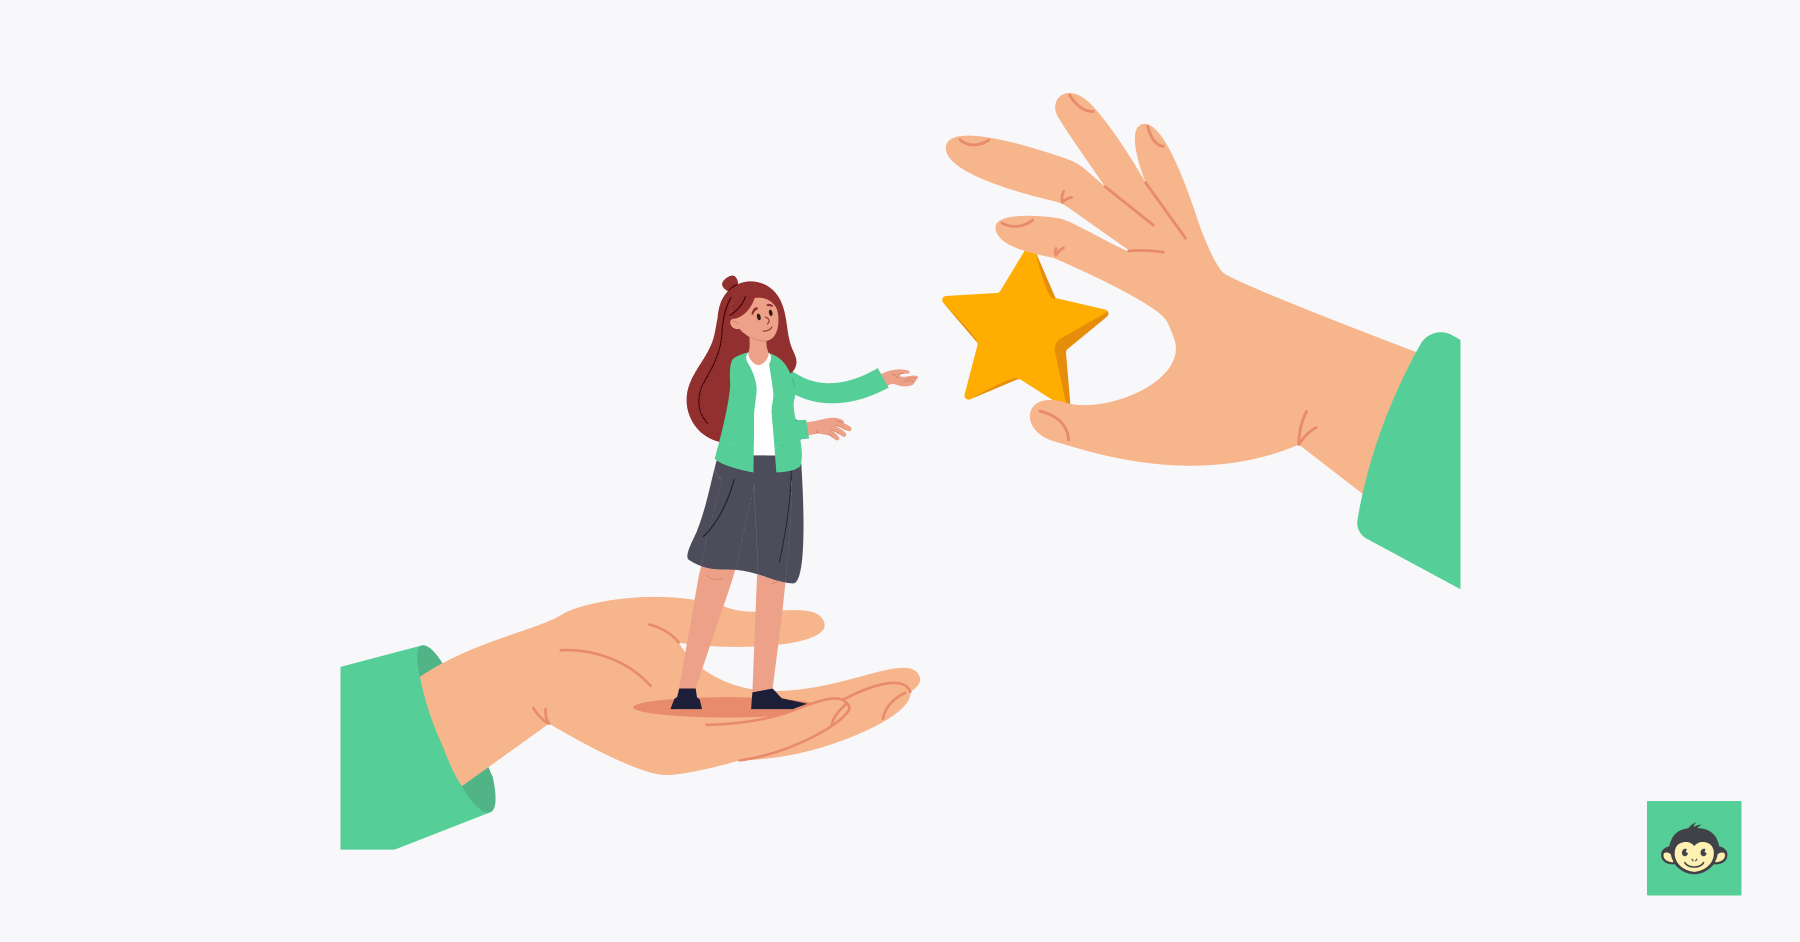 An employee is getting a star star for a job well done. 